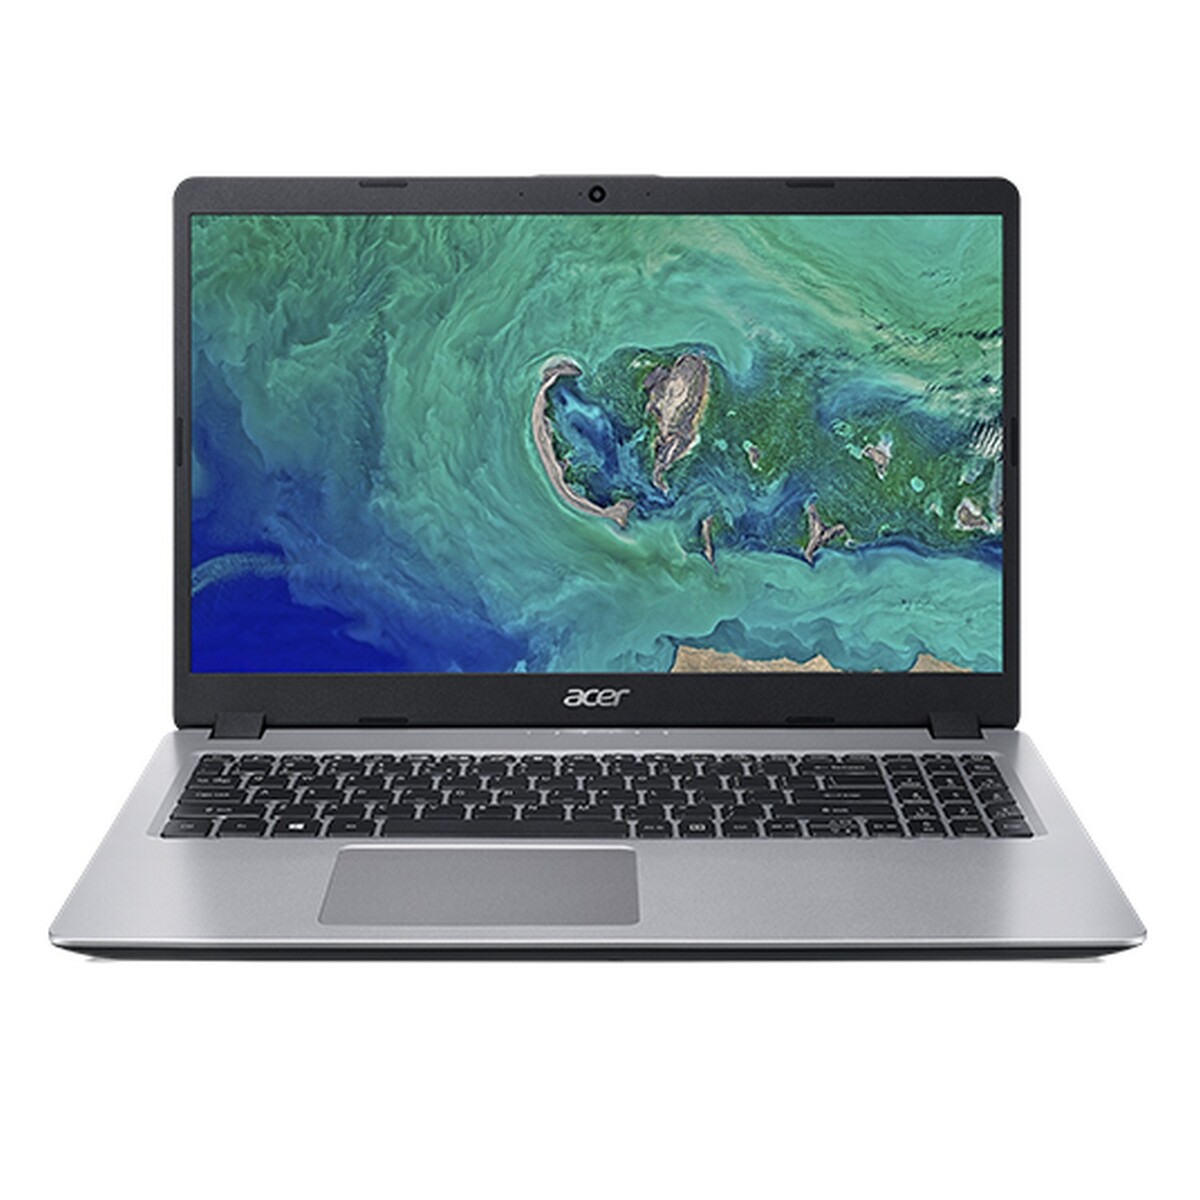 Acer Notebook A515-52 Core i3 8th Gen 15.6" Win10 Silver